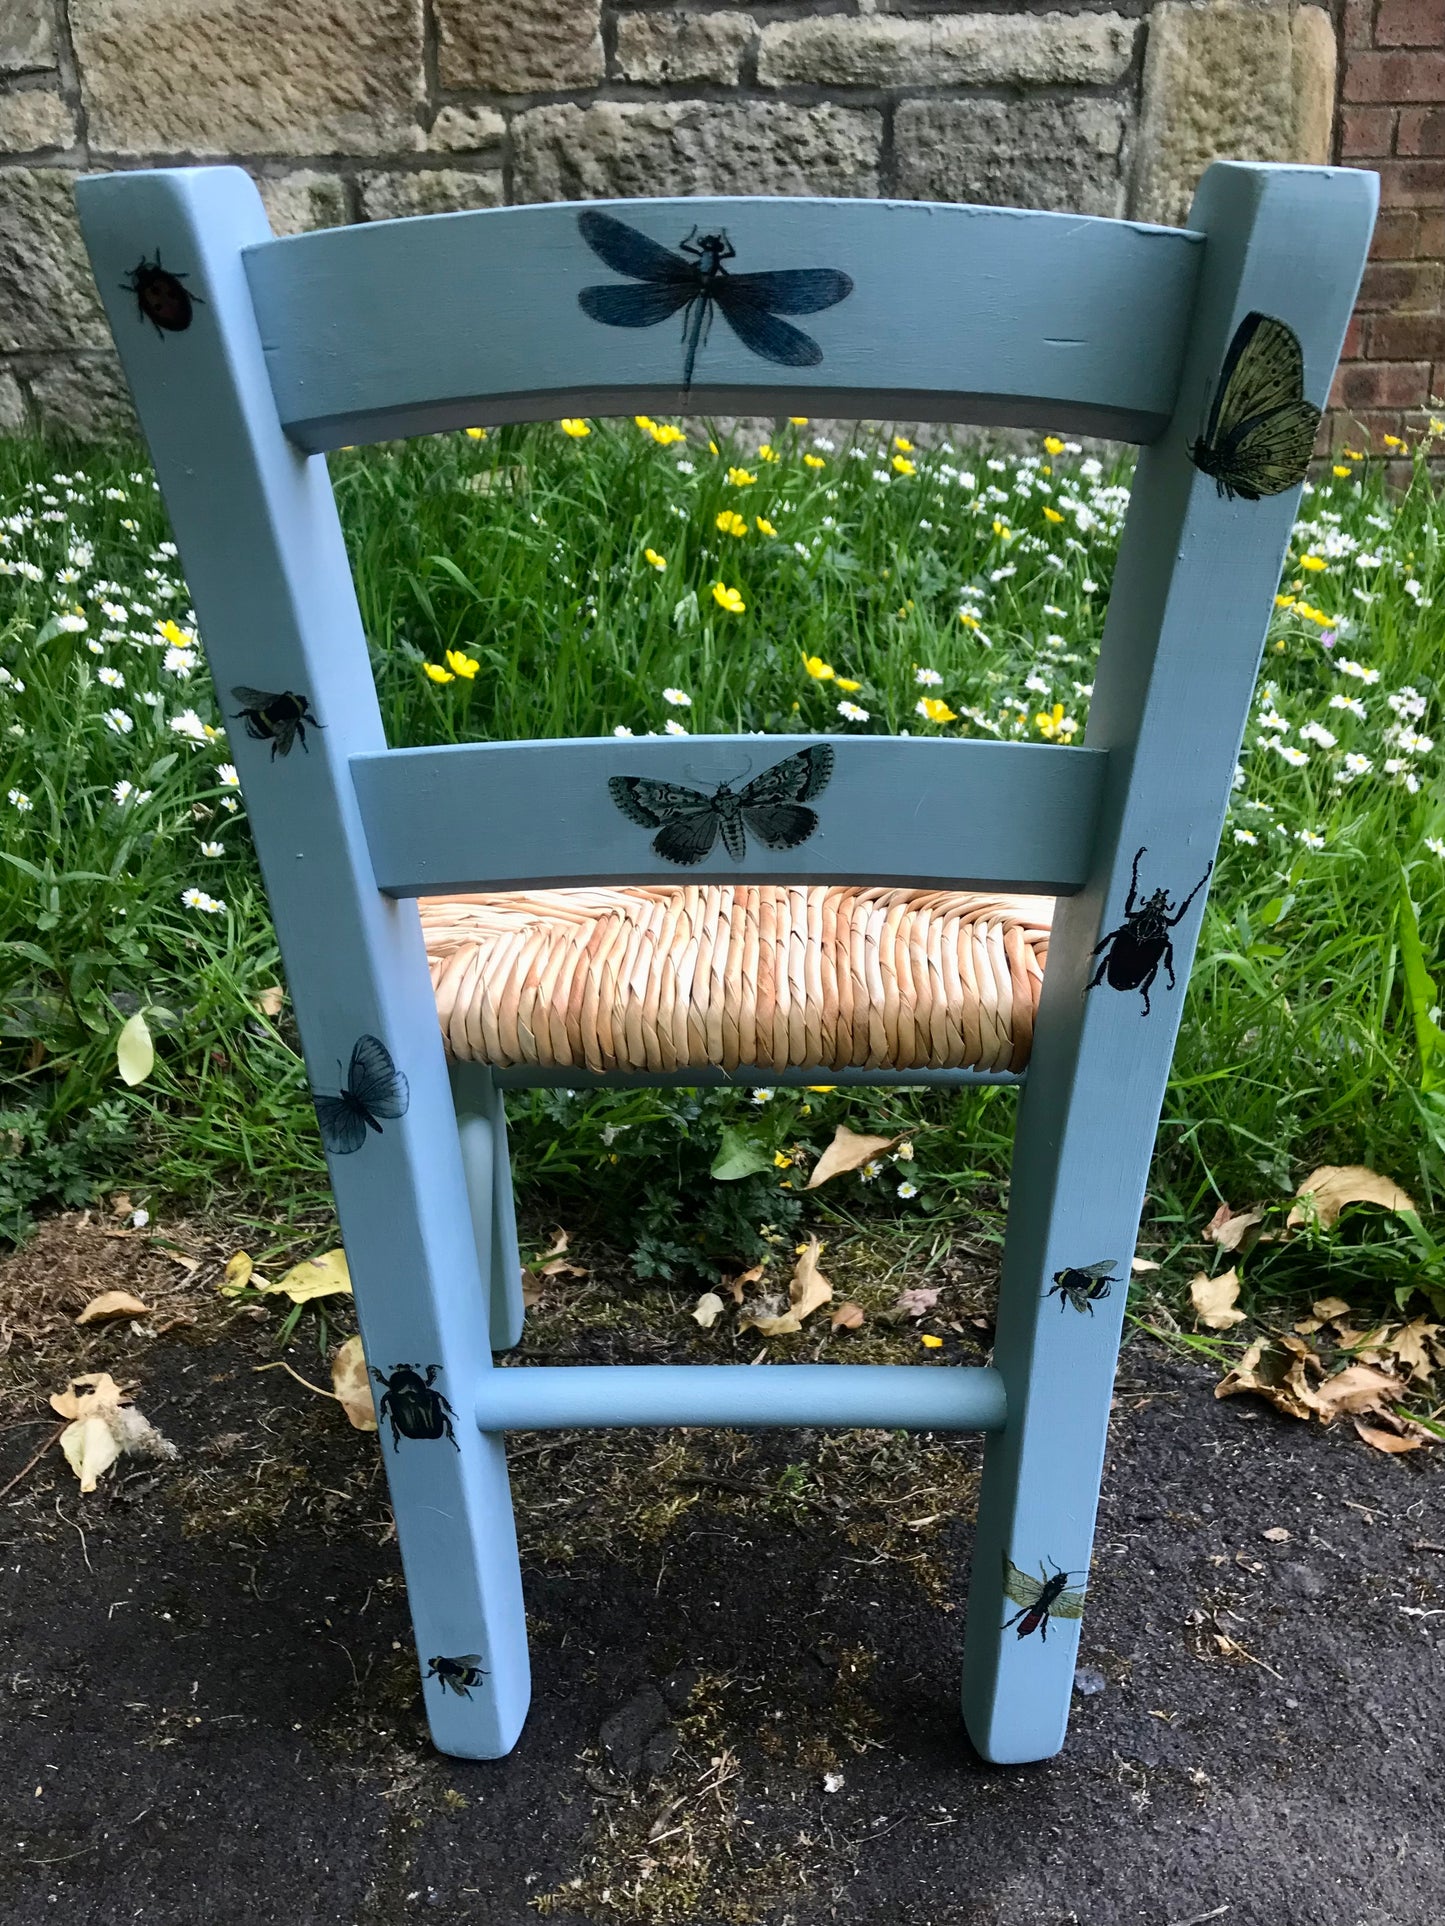 Rush seat personalised children's chair - Random Bug Chair theme - made to order